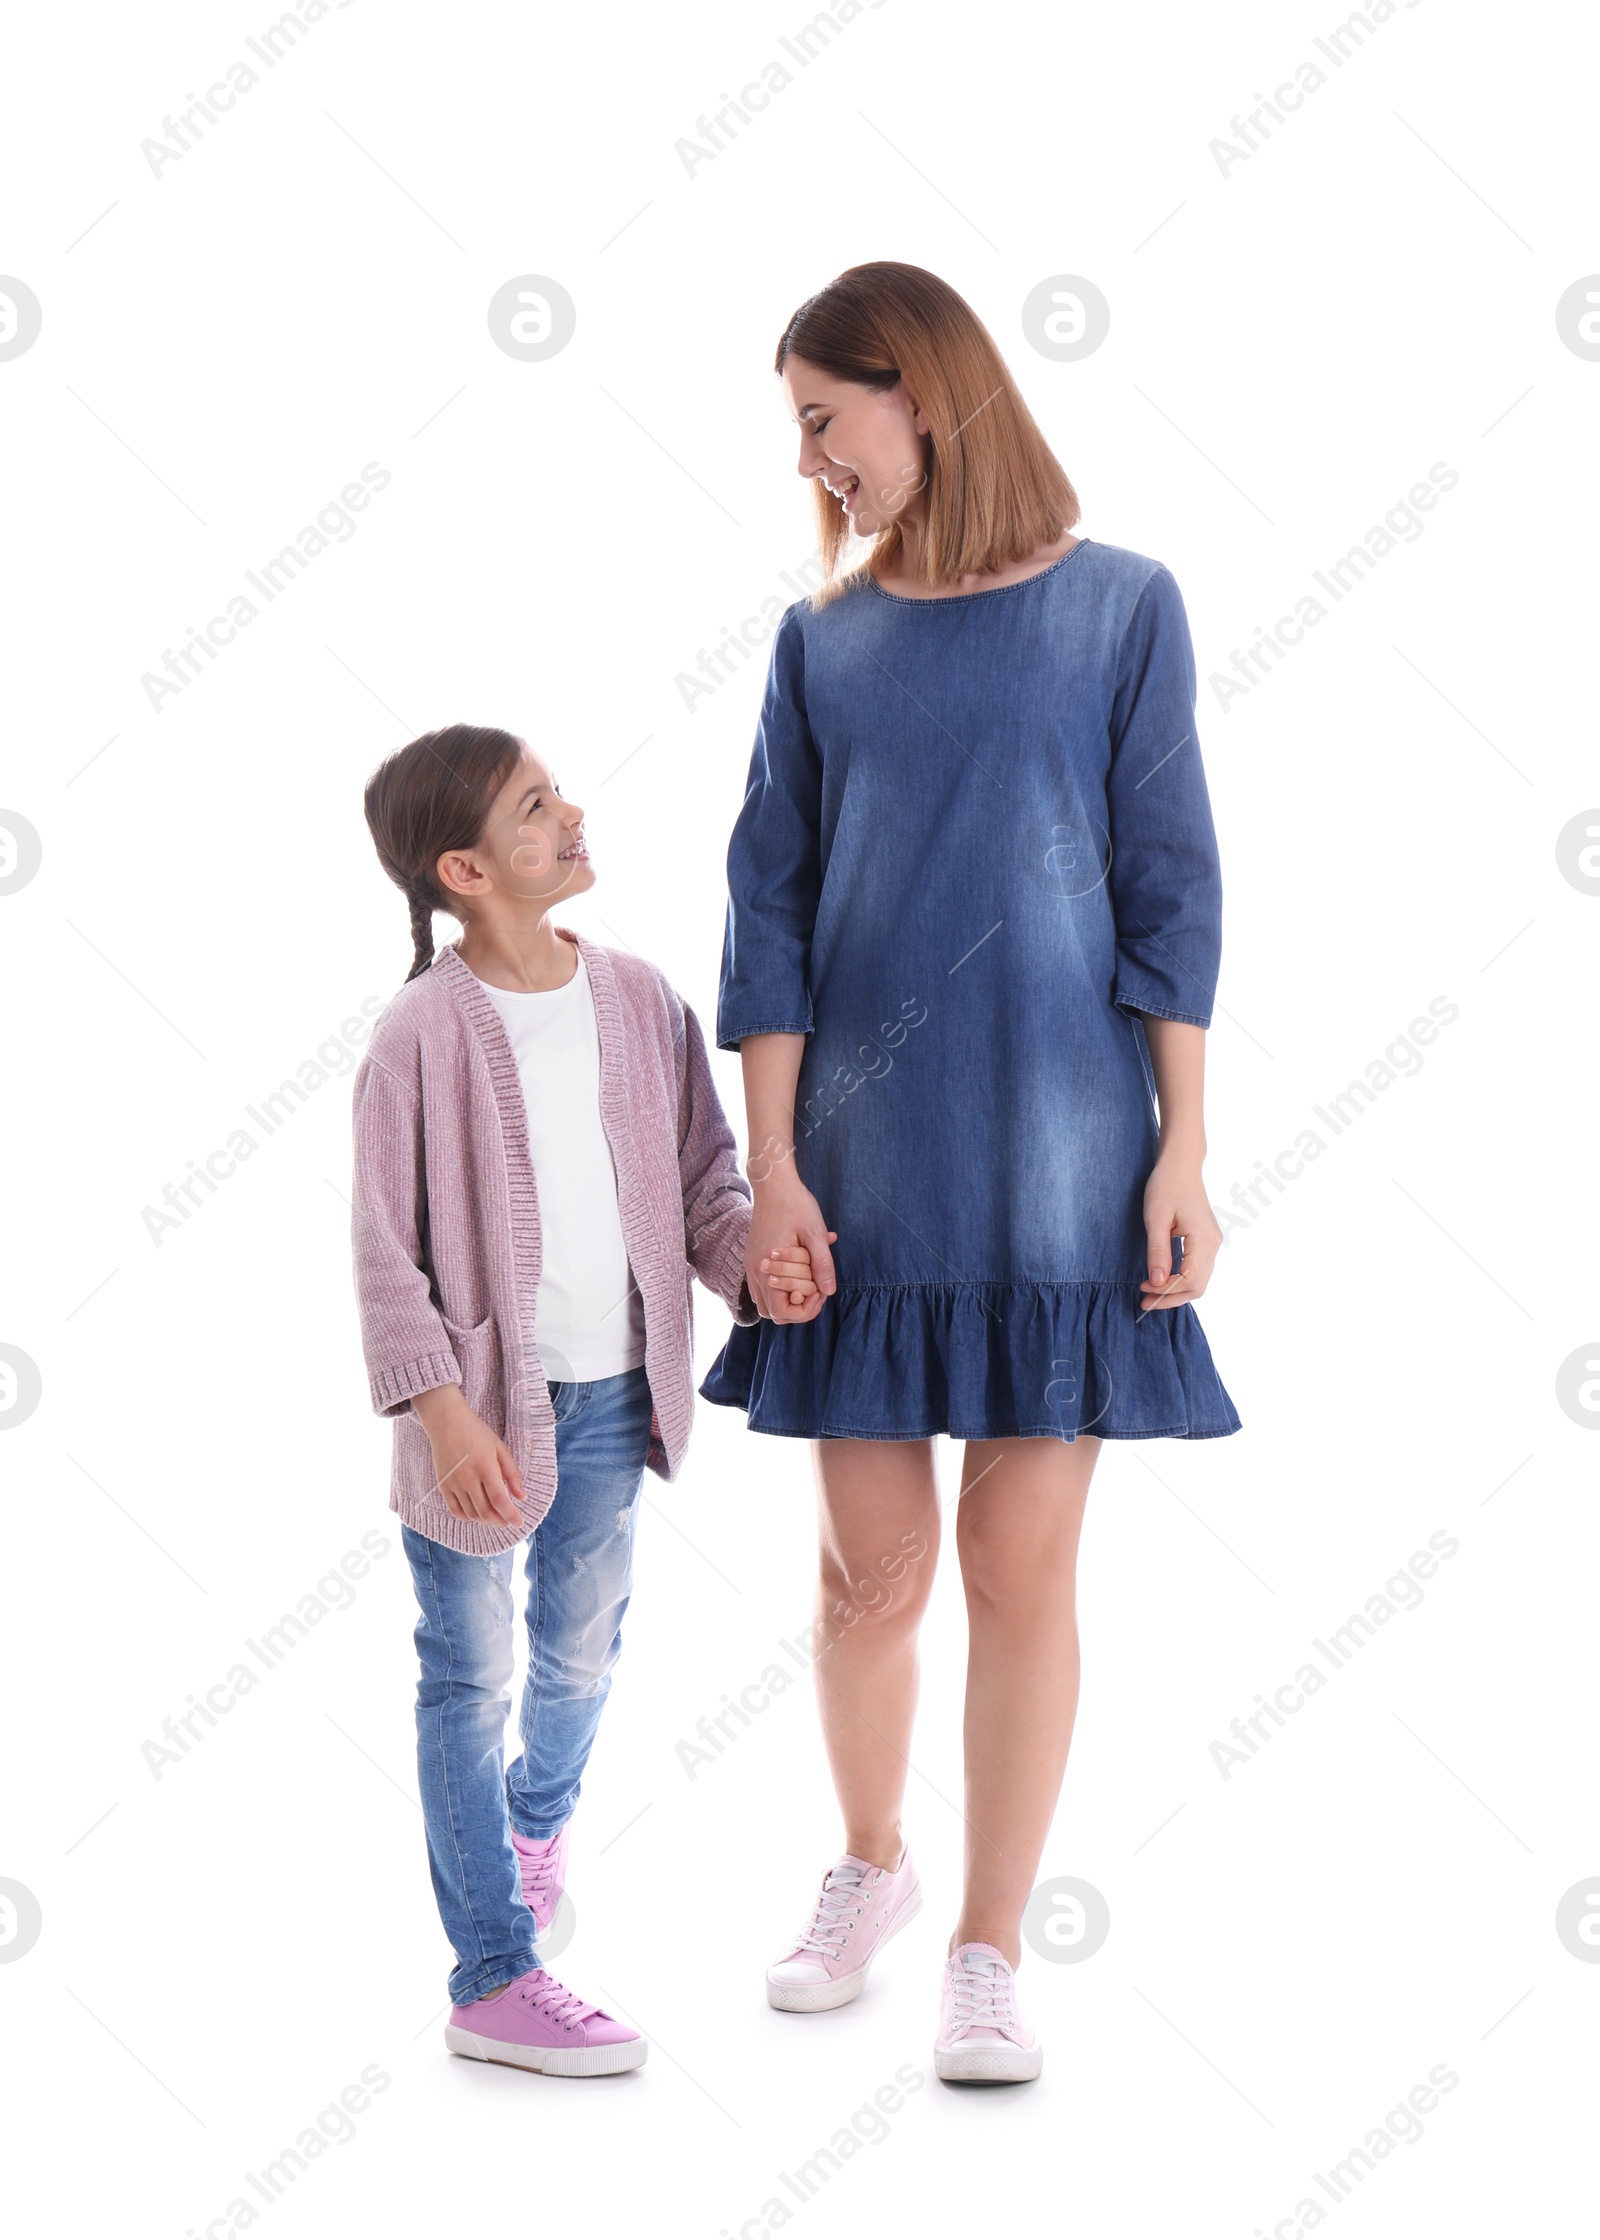 Photo of Happy woman and daughter in stylish clothes on white background